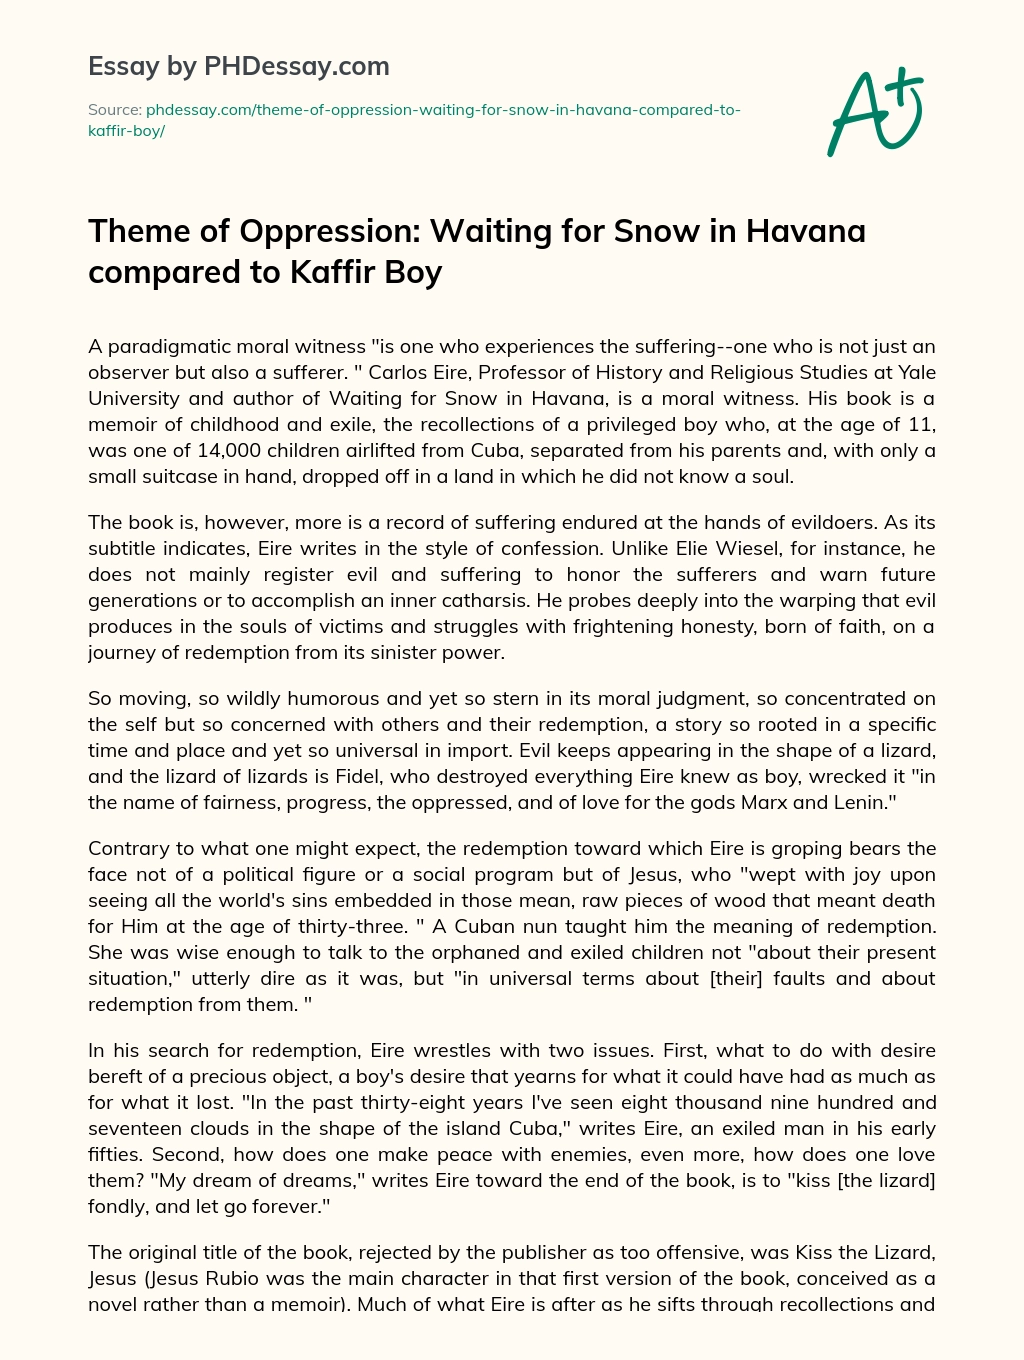 Theme of Oppression: Waiting for Snow in Havana compared to Kaffir Boy essay